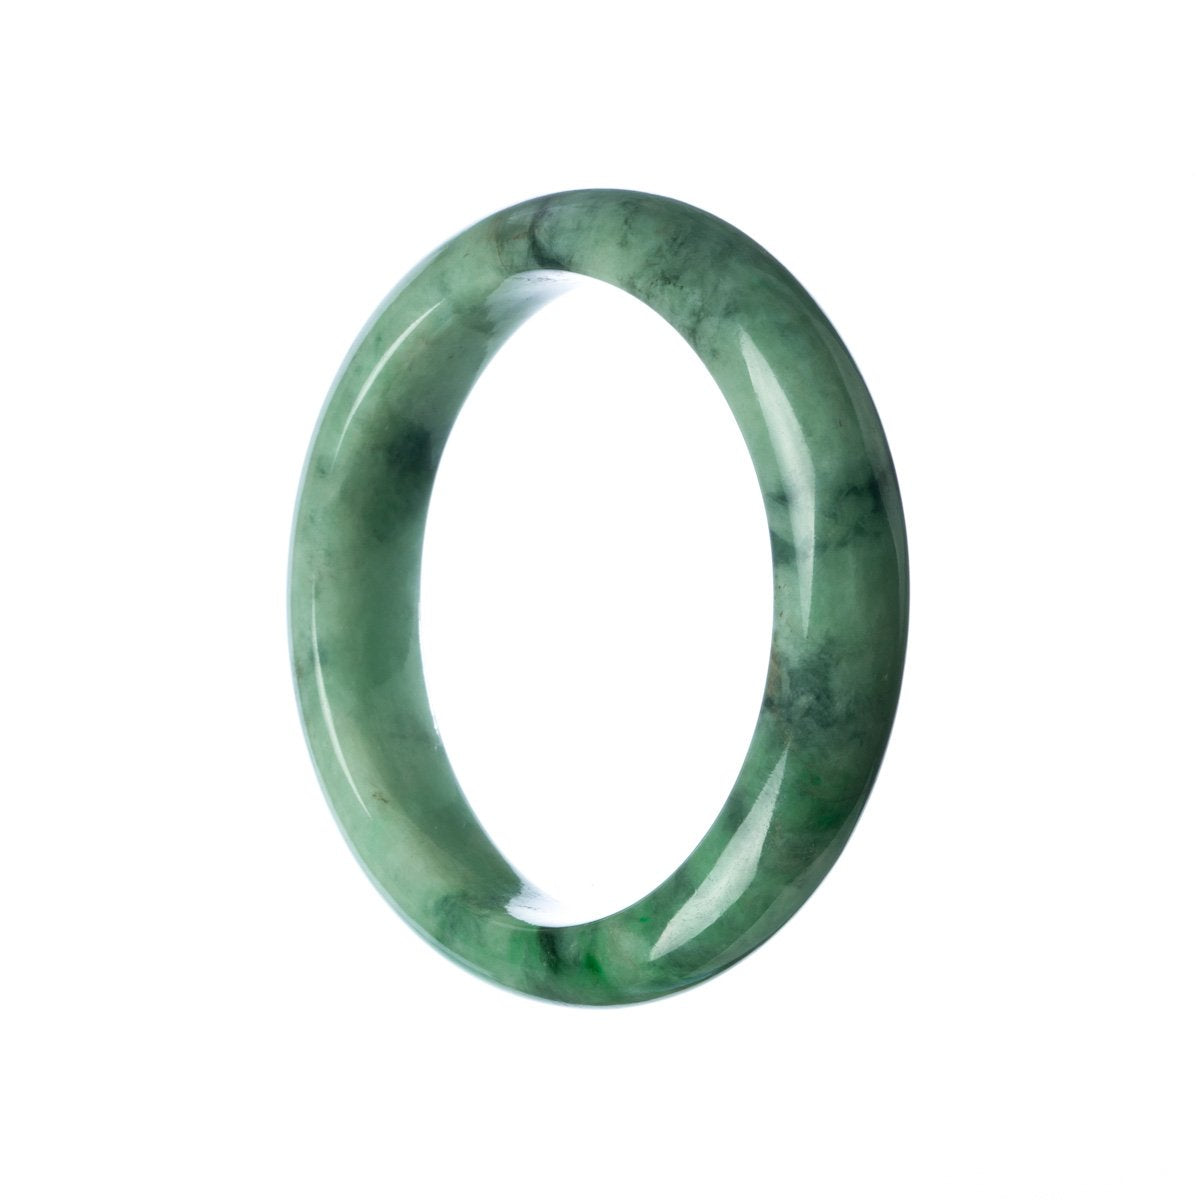 An exquisite green Burmese jade bracelet featuring genuine Grade A stones. The bracelet is 57mm in size and has a semi-round shape. A stunning piece of jewelry from MAYS GEMS.